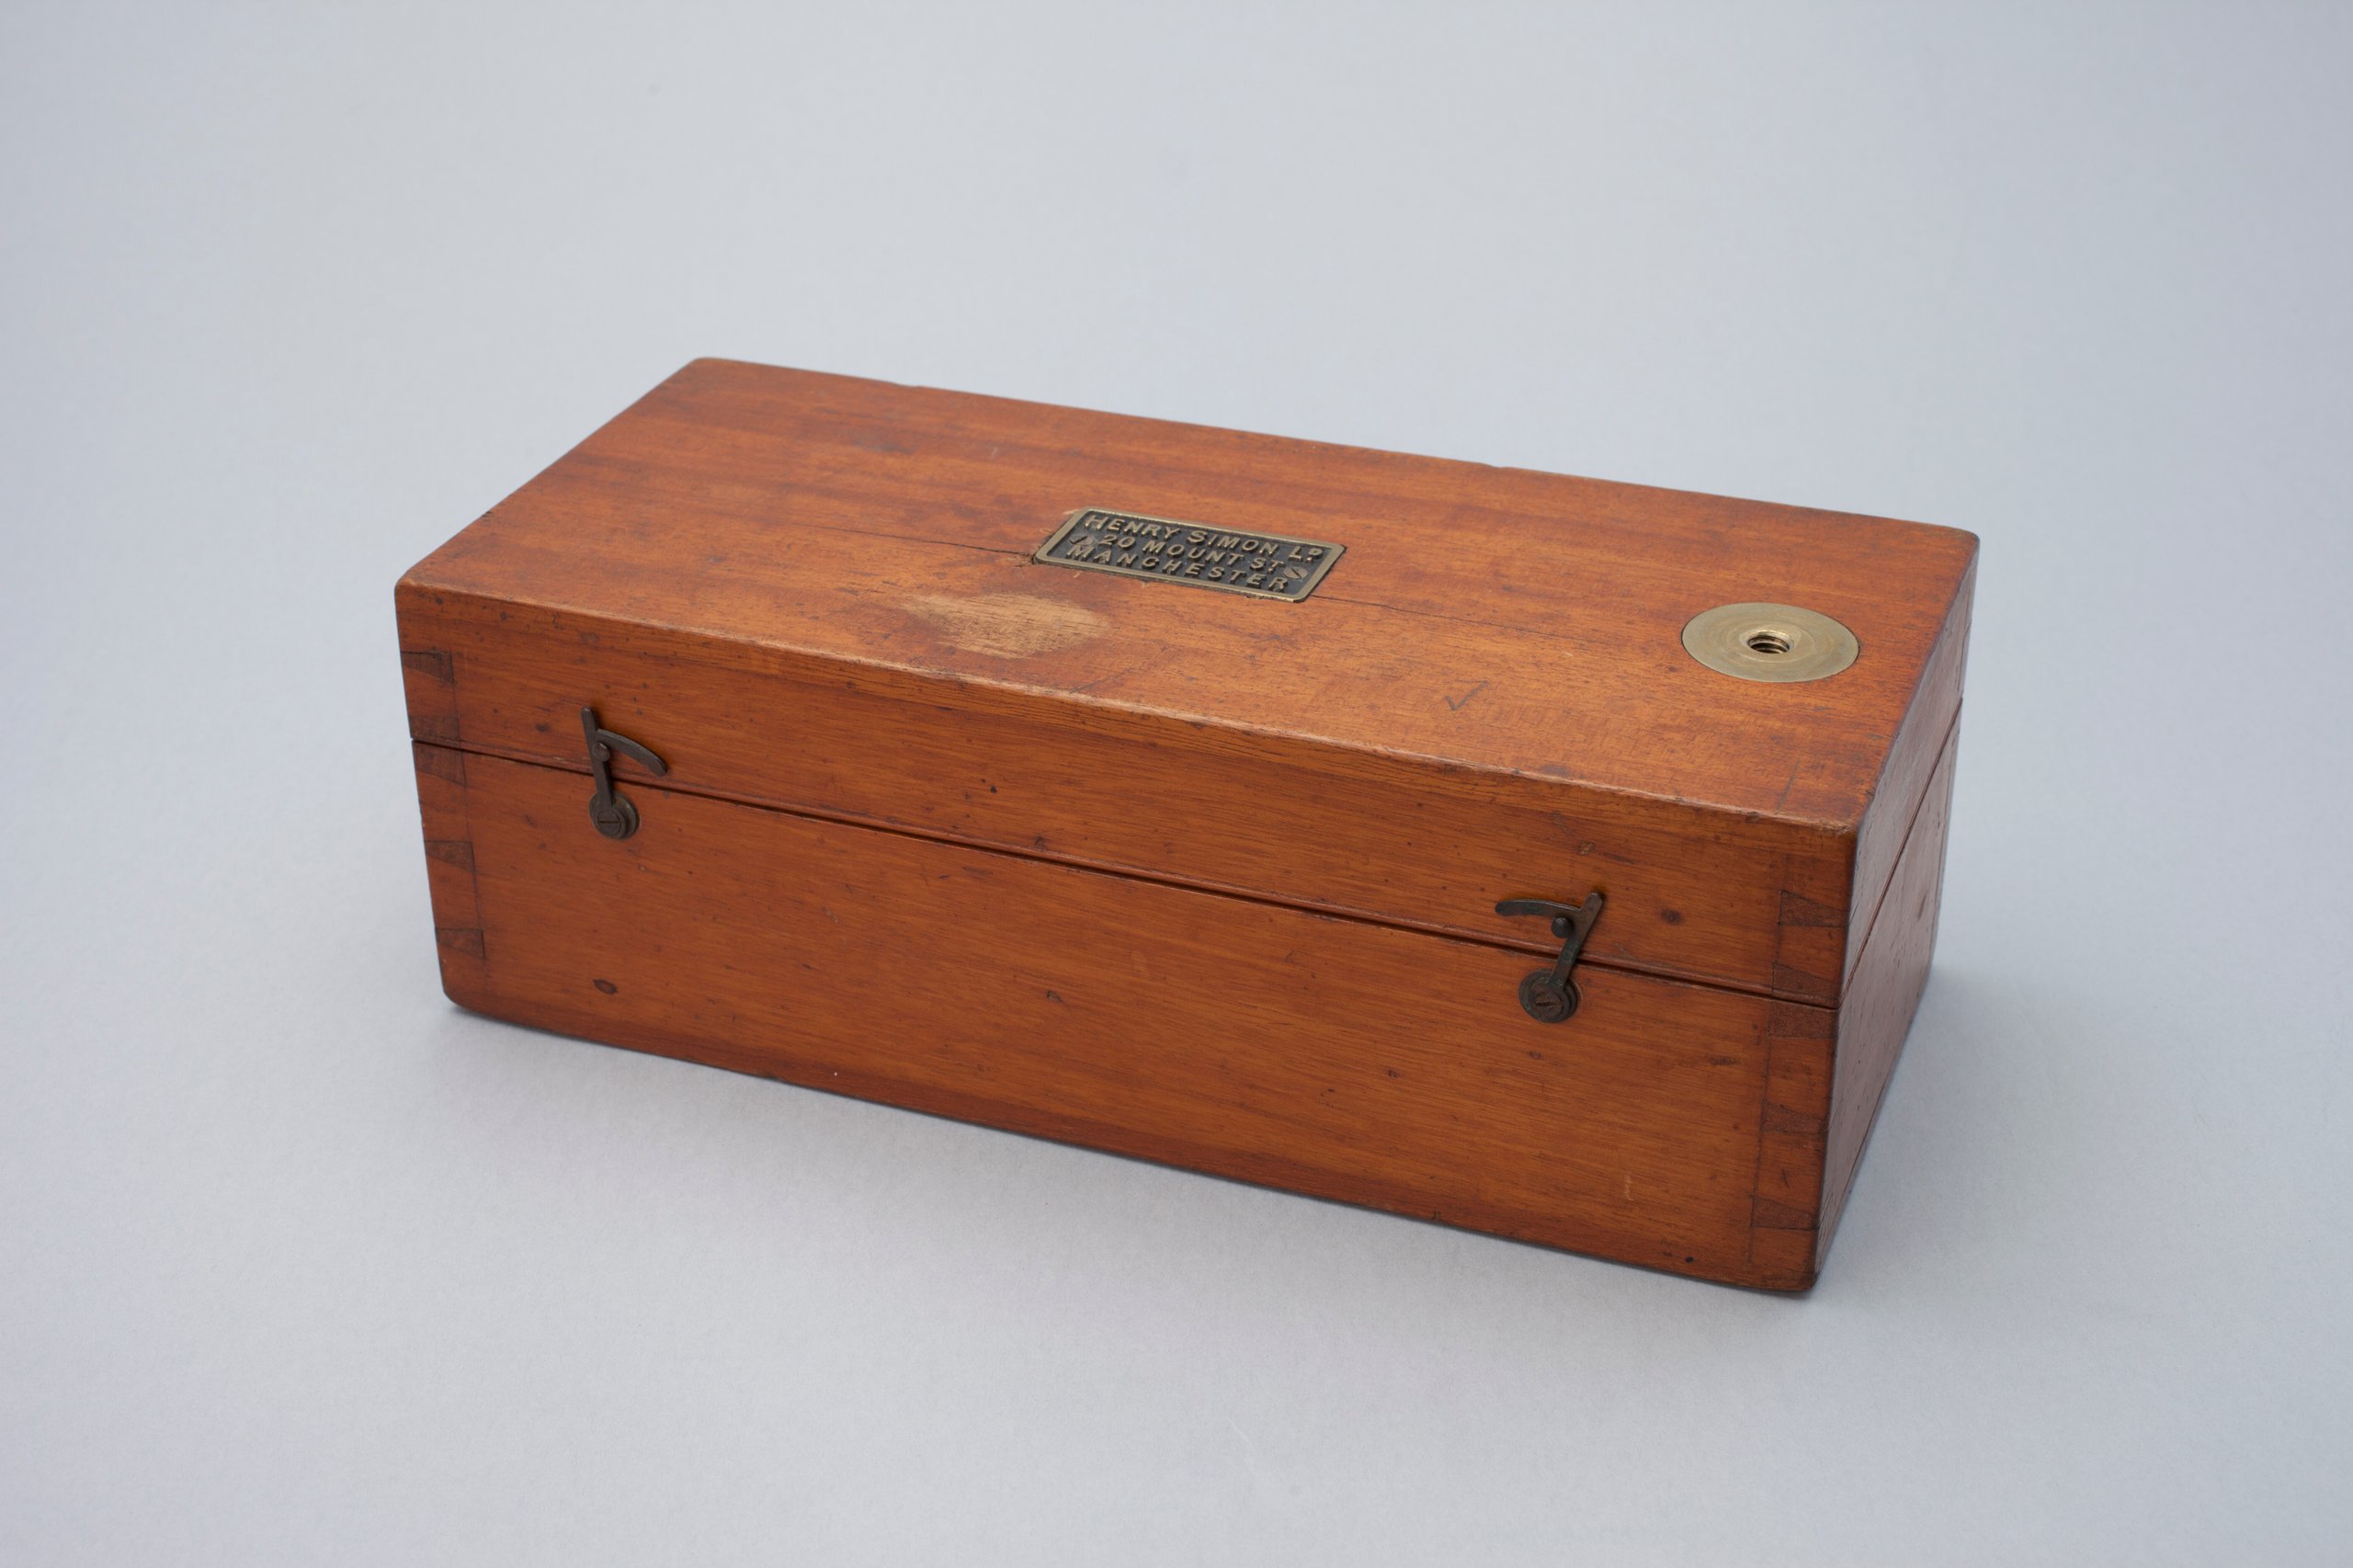 Wooden box containing instruments made by Henry Simon Ltd